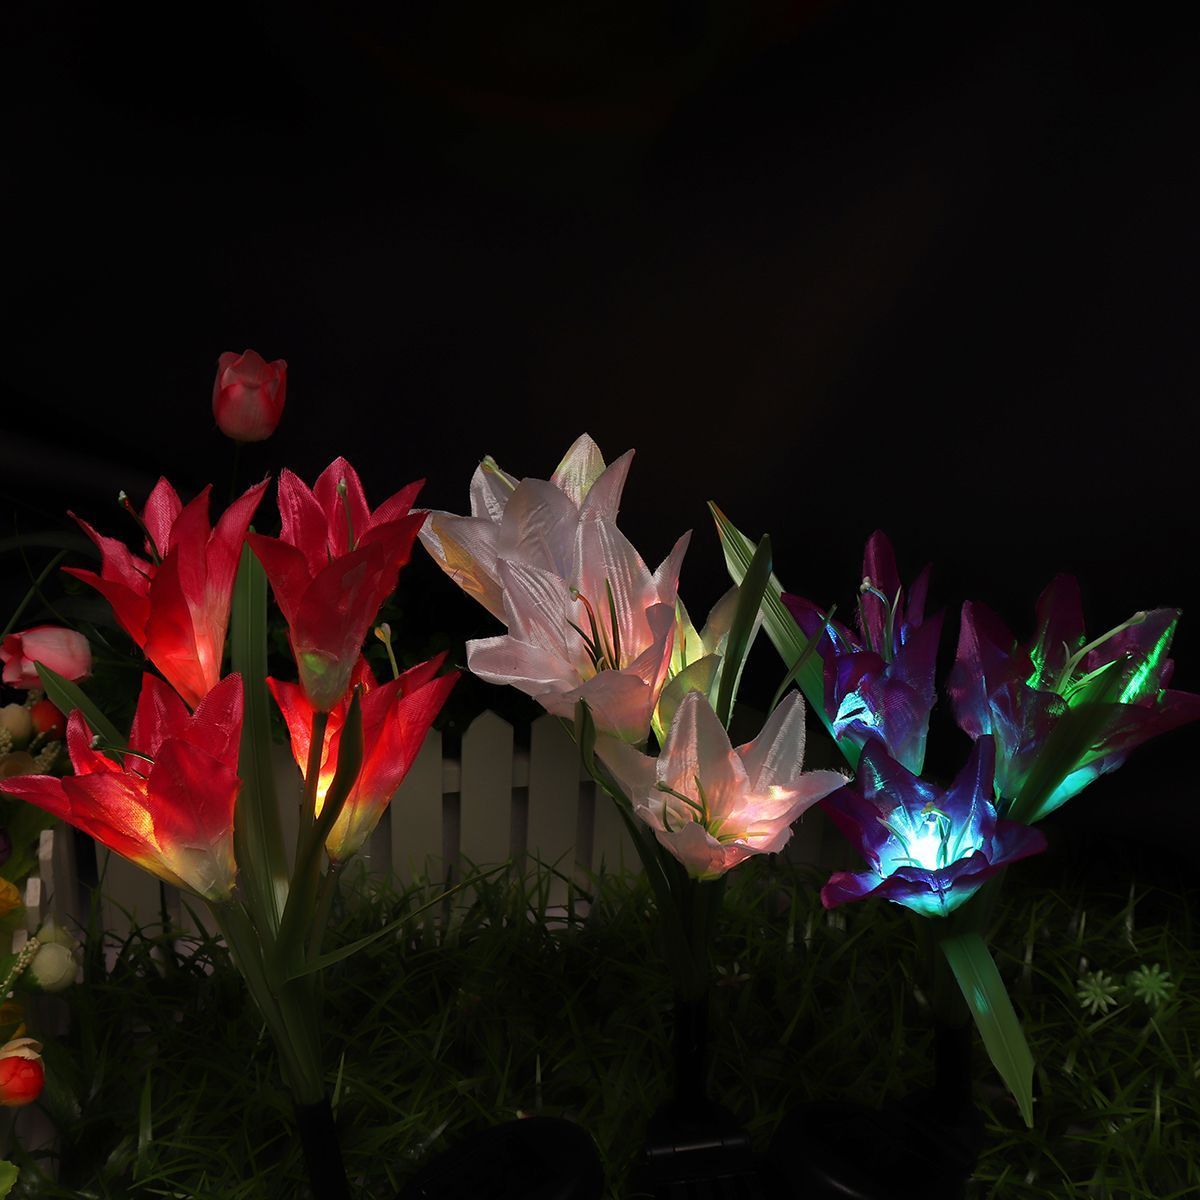 3Pc-4-Head-Lily-Flower-Solar-Light-Colorful-LED-Decorative-Outdoor-Lawn-Lamp-Home-Garden-IP65-Waterp-1621117